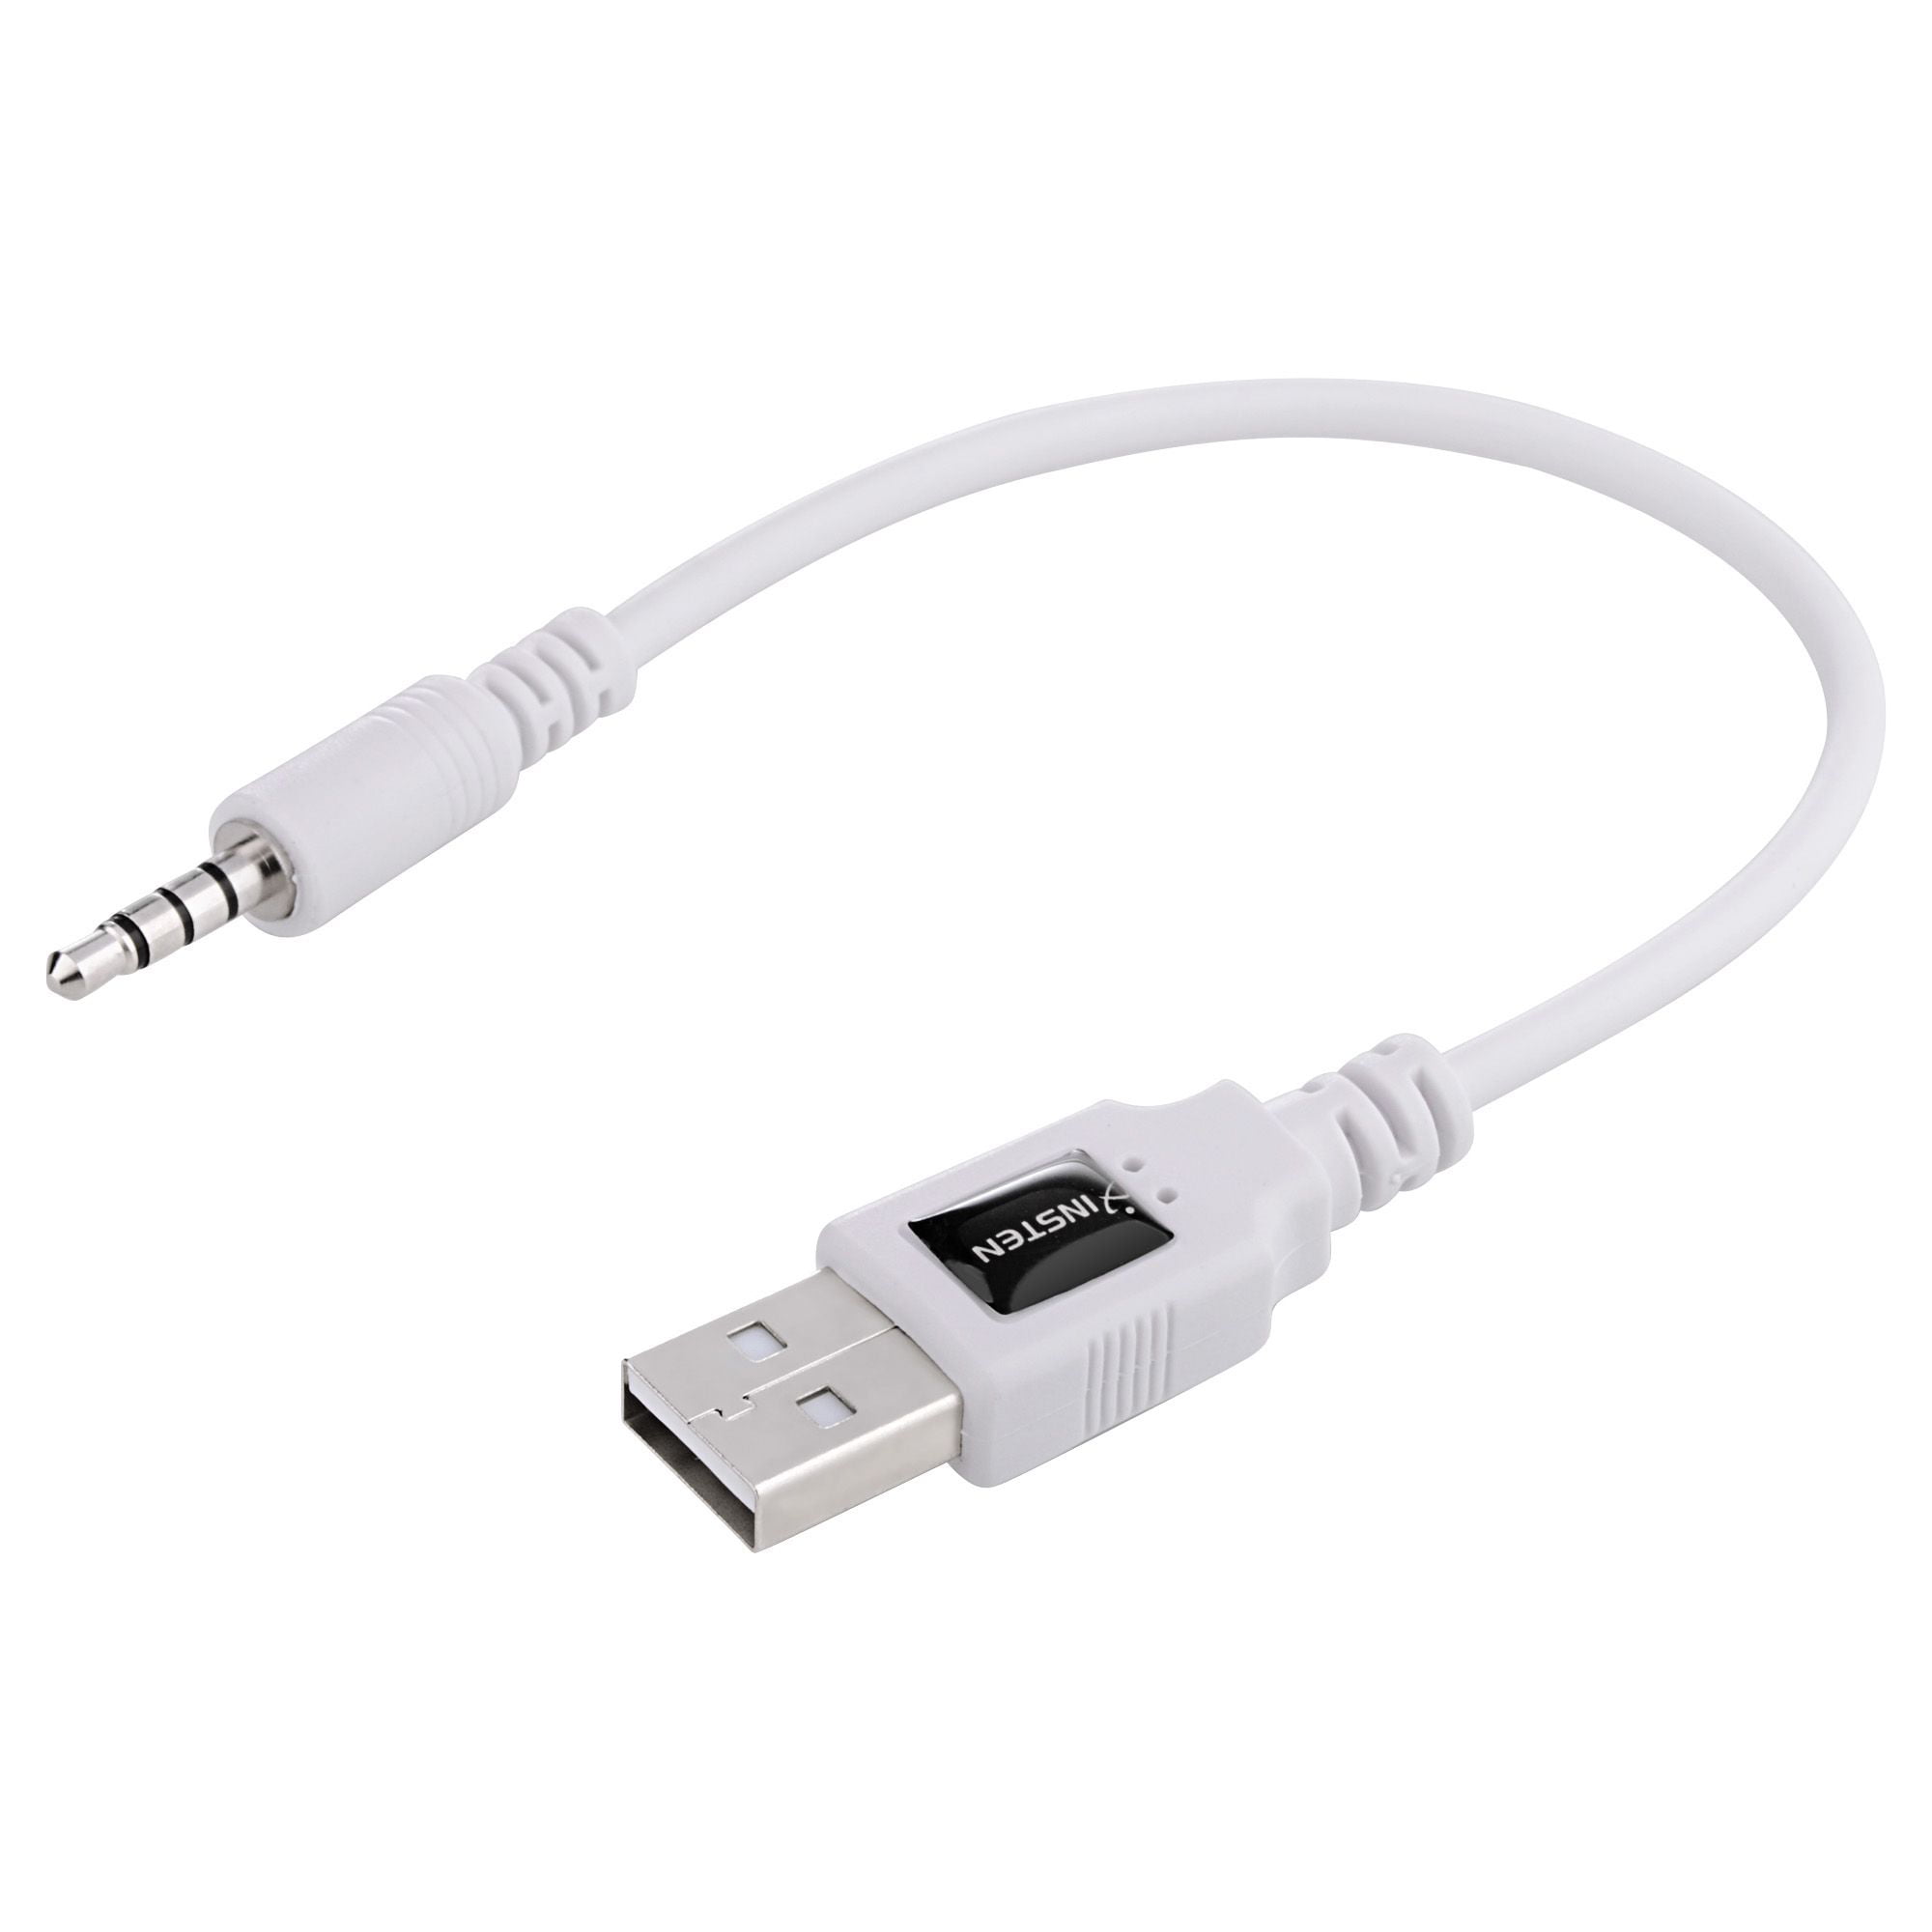 Wholesale Lot 10 USB Data Sync Cable for iPod Shuffle